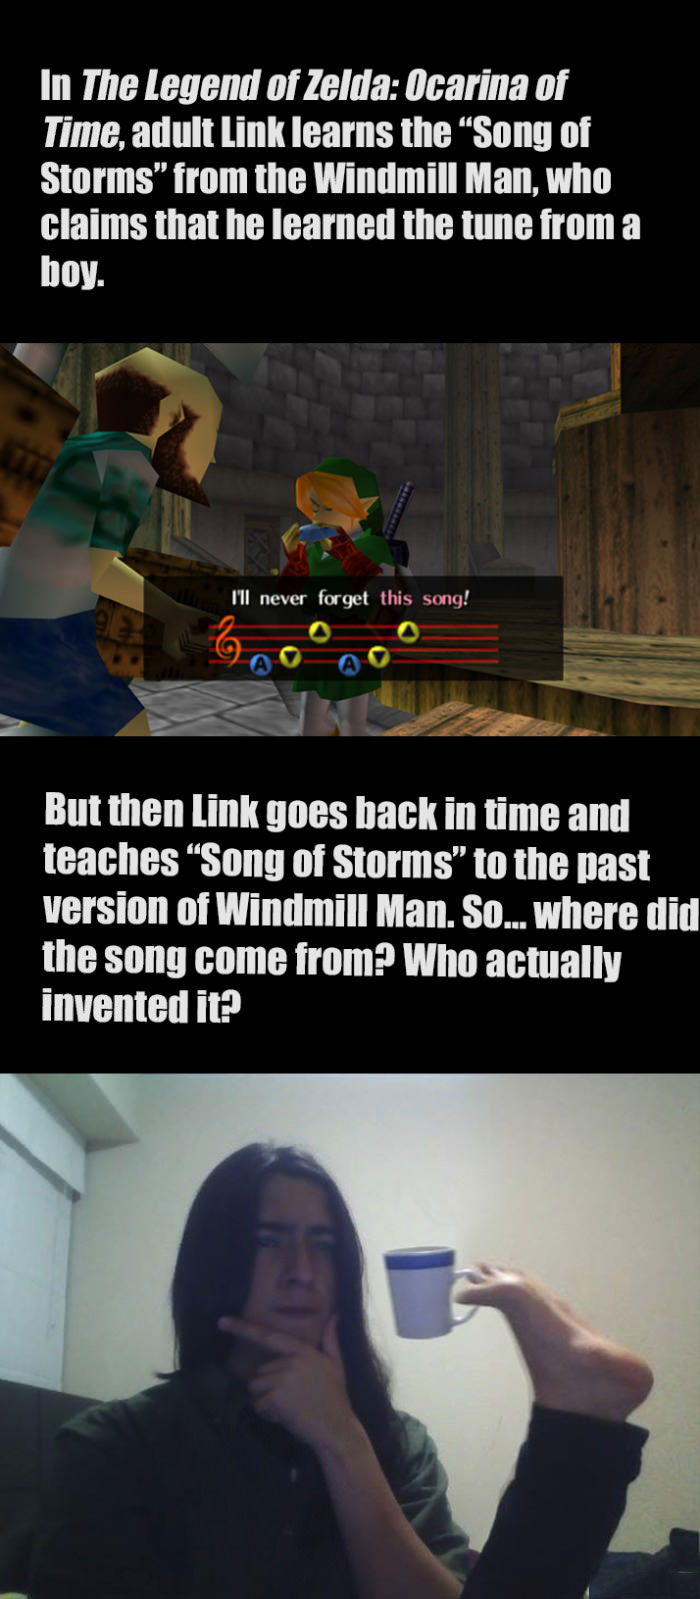 time paradox in the legend of zelda: ocarina of time